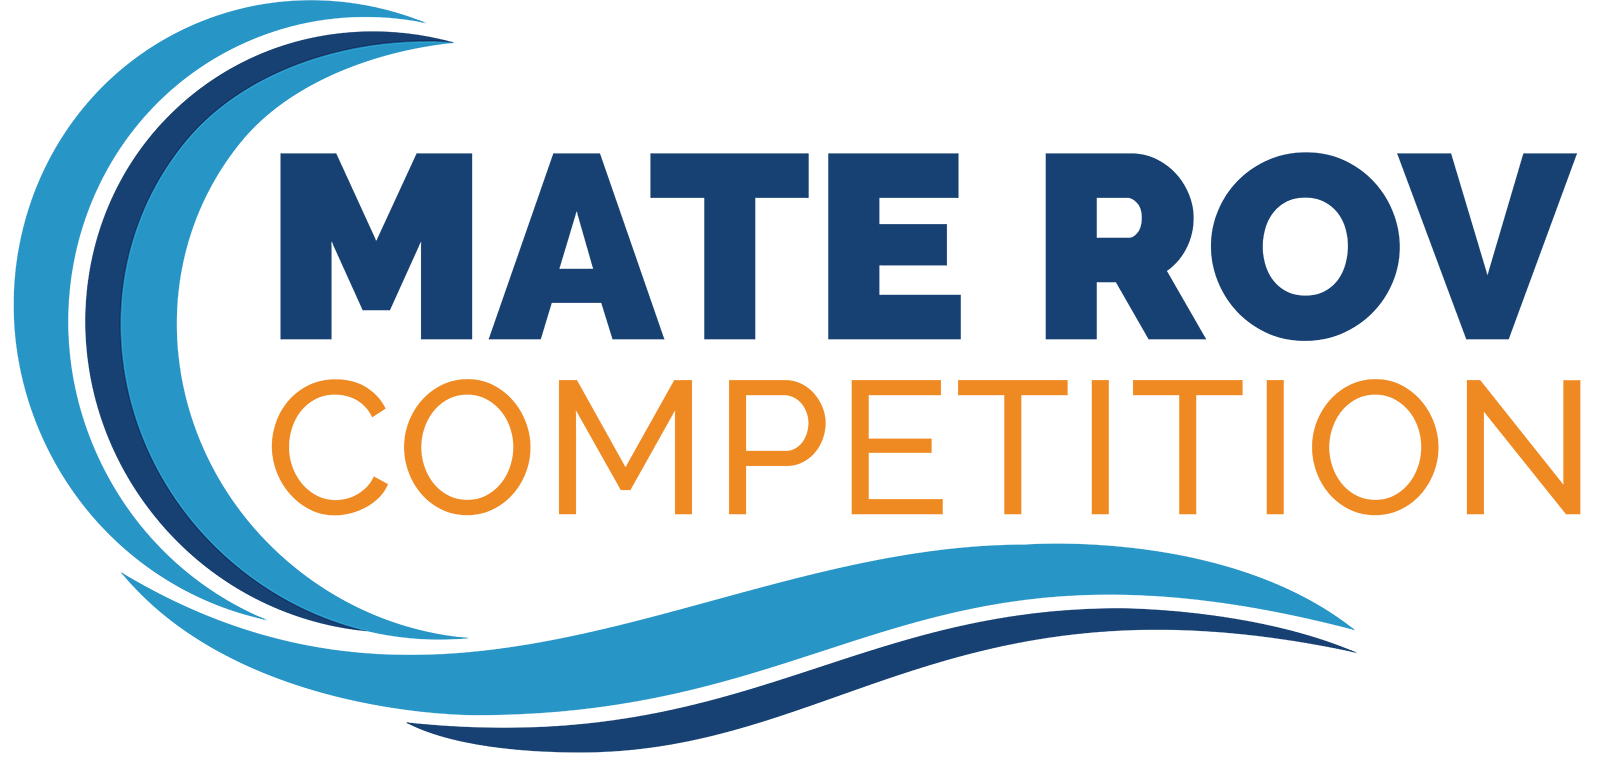 MATE ROV Competition